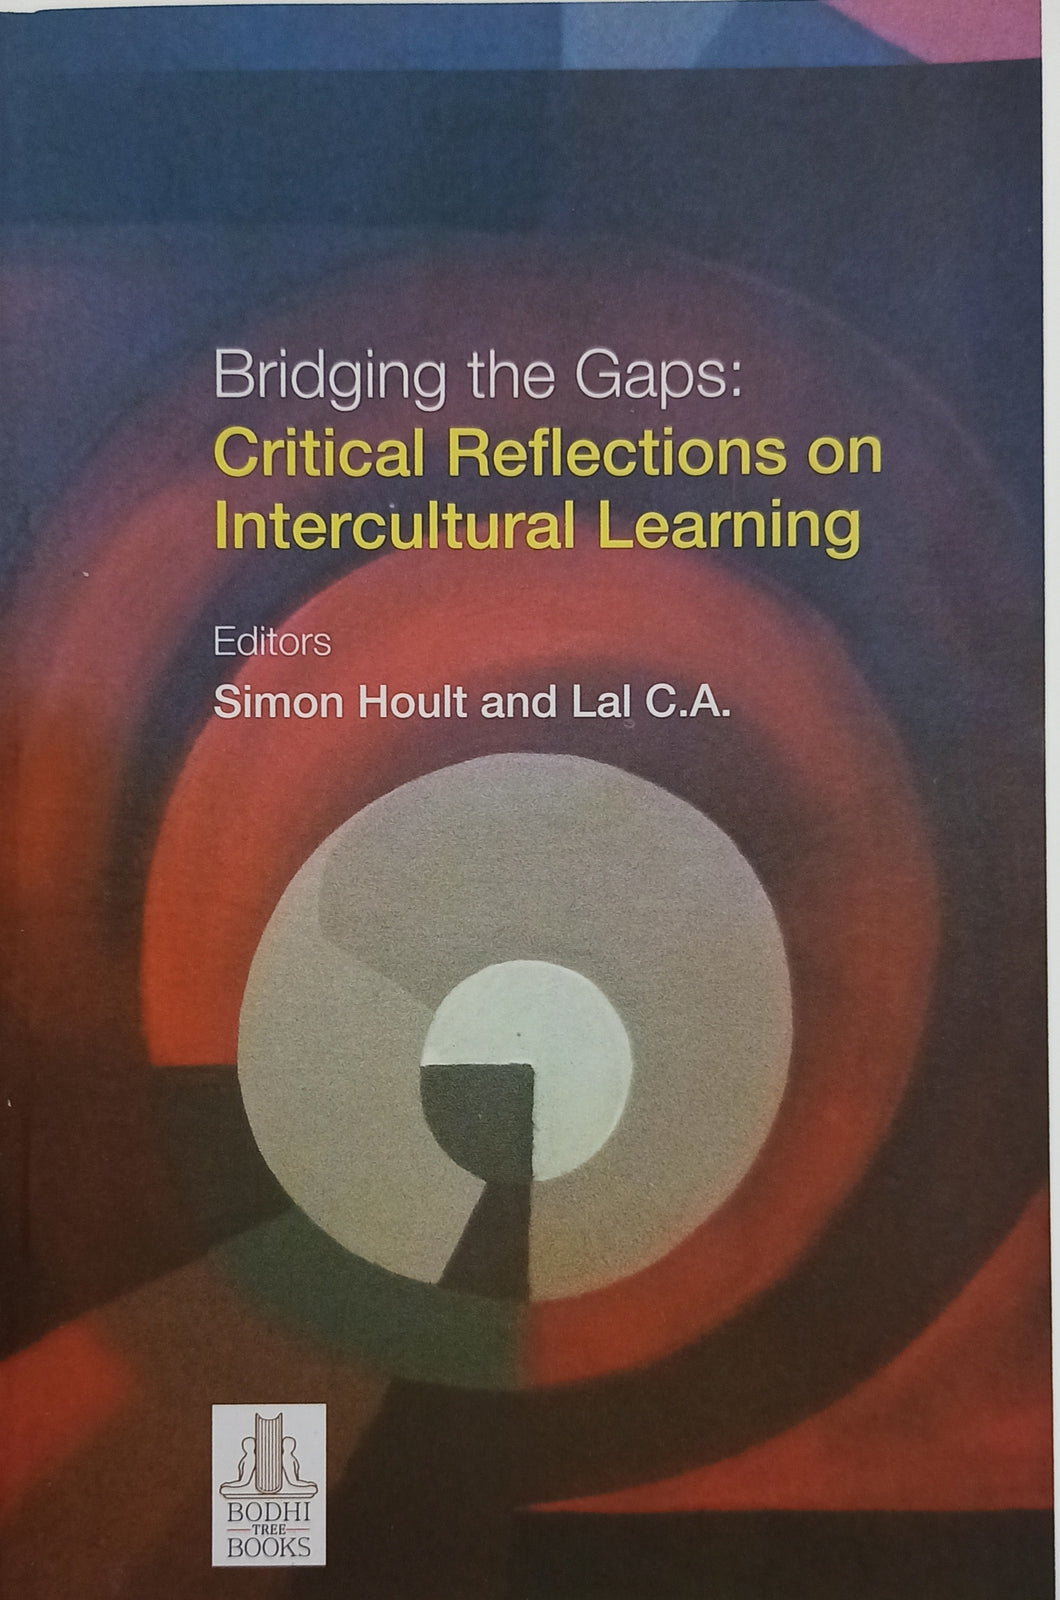 Bridging the Gaps: Critical Reflections on Intercultural Learning